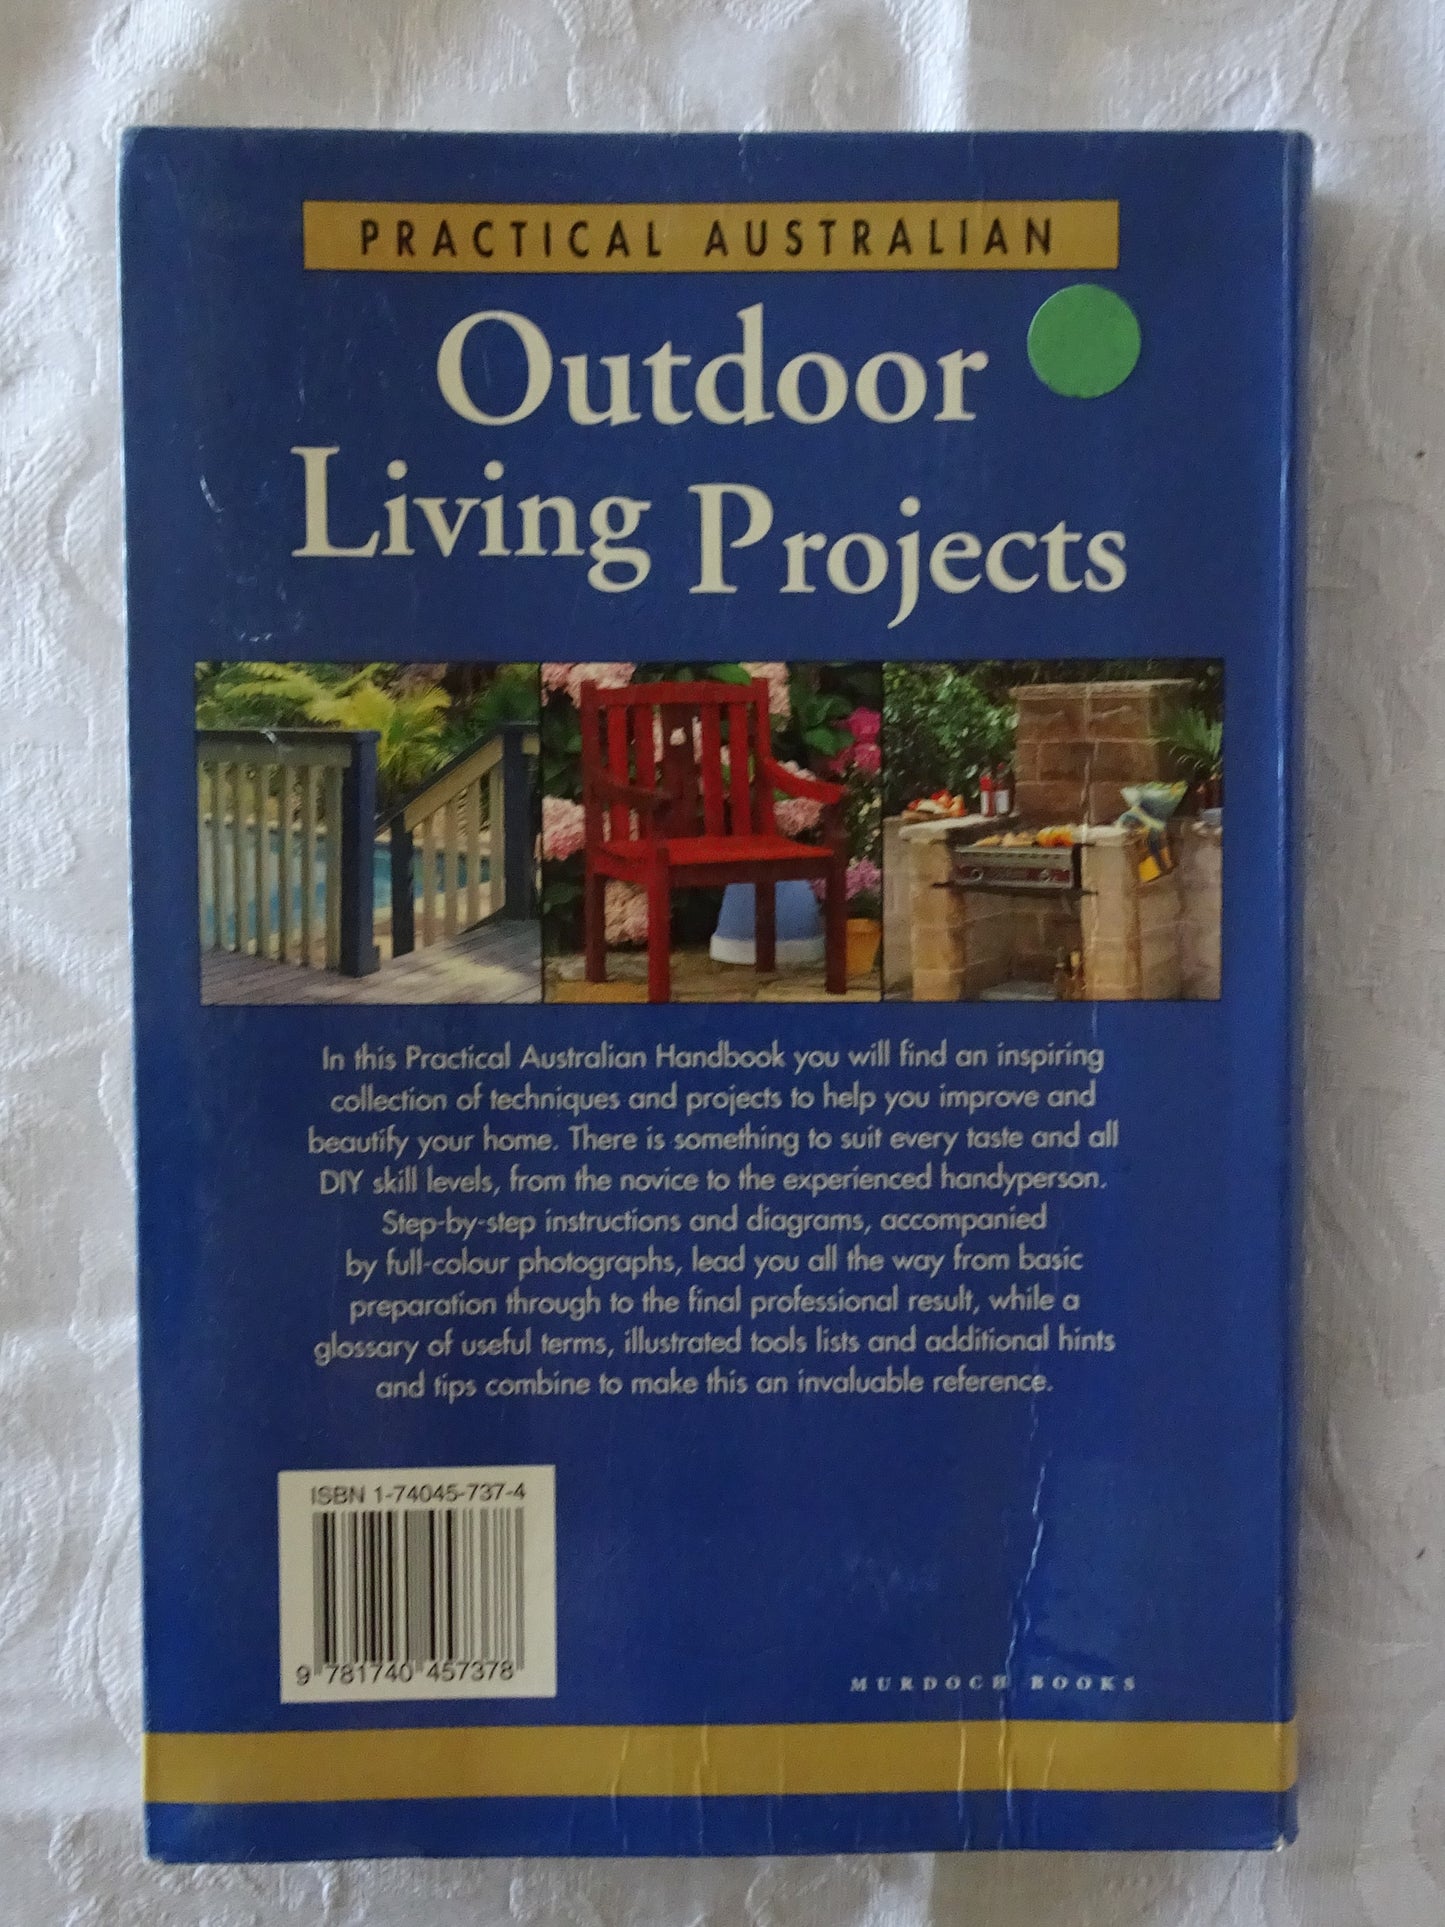 Outdoor Living Projects by John Bowler & Frank Gardner